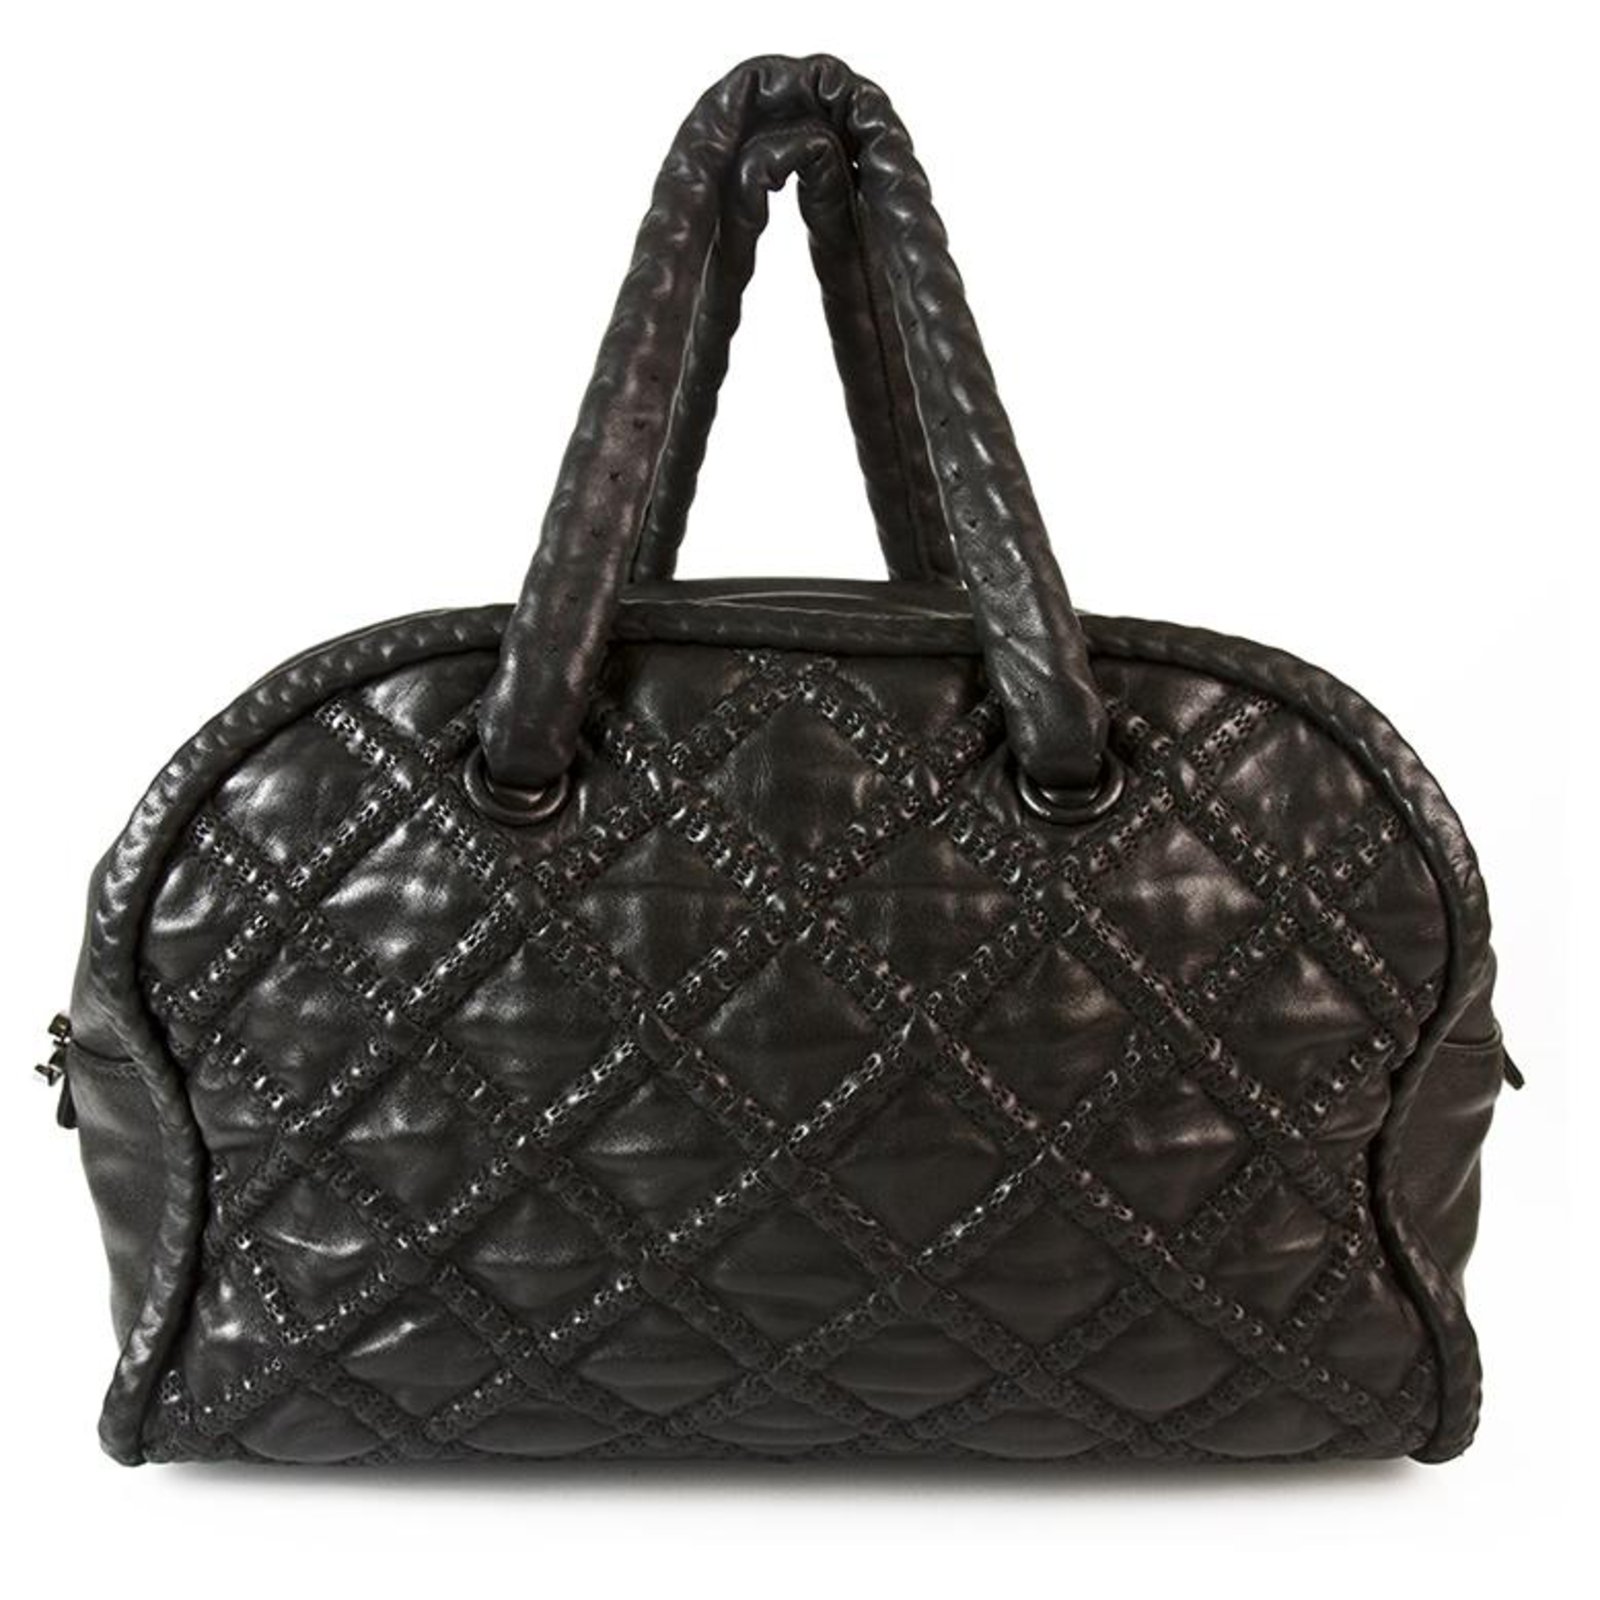 CHANEL Boho style Black Leather Large Bowling bag, chain inside leather ...